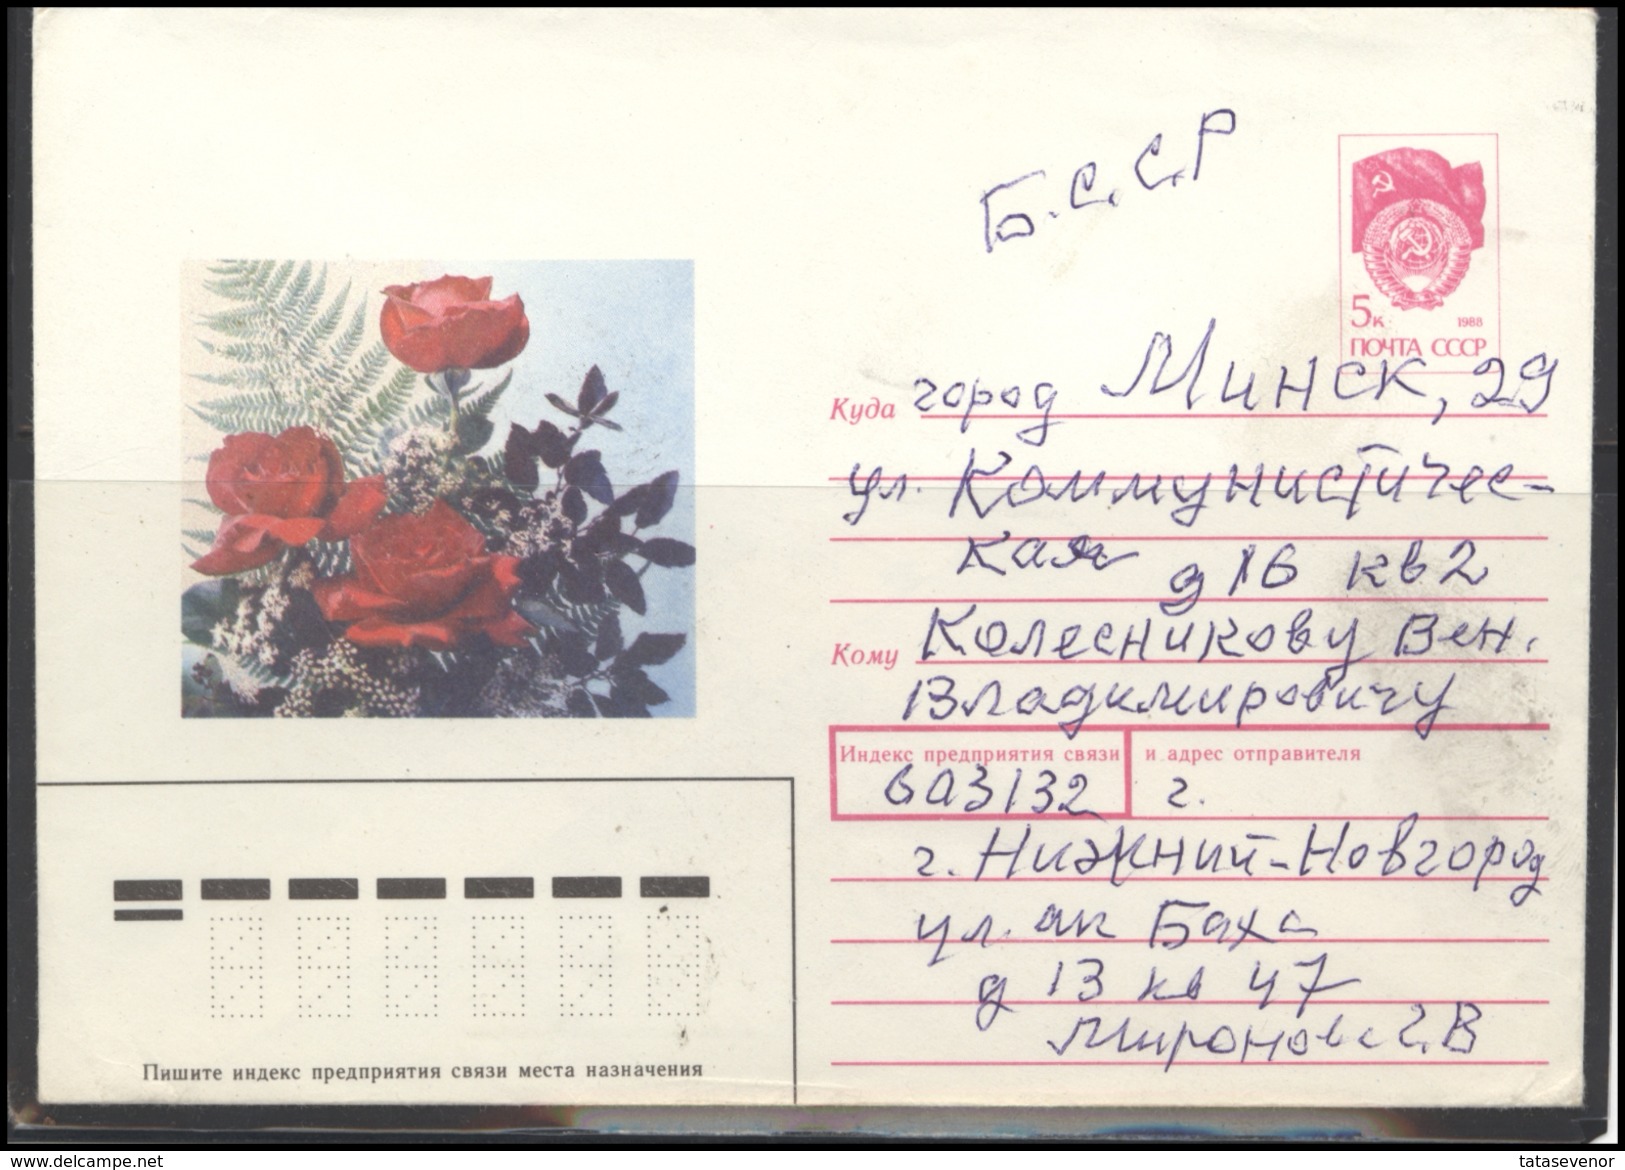 RUSSIA USSR starter lot of USED COVERS ROSES. No duplication.